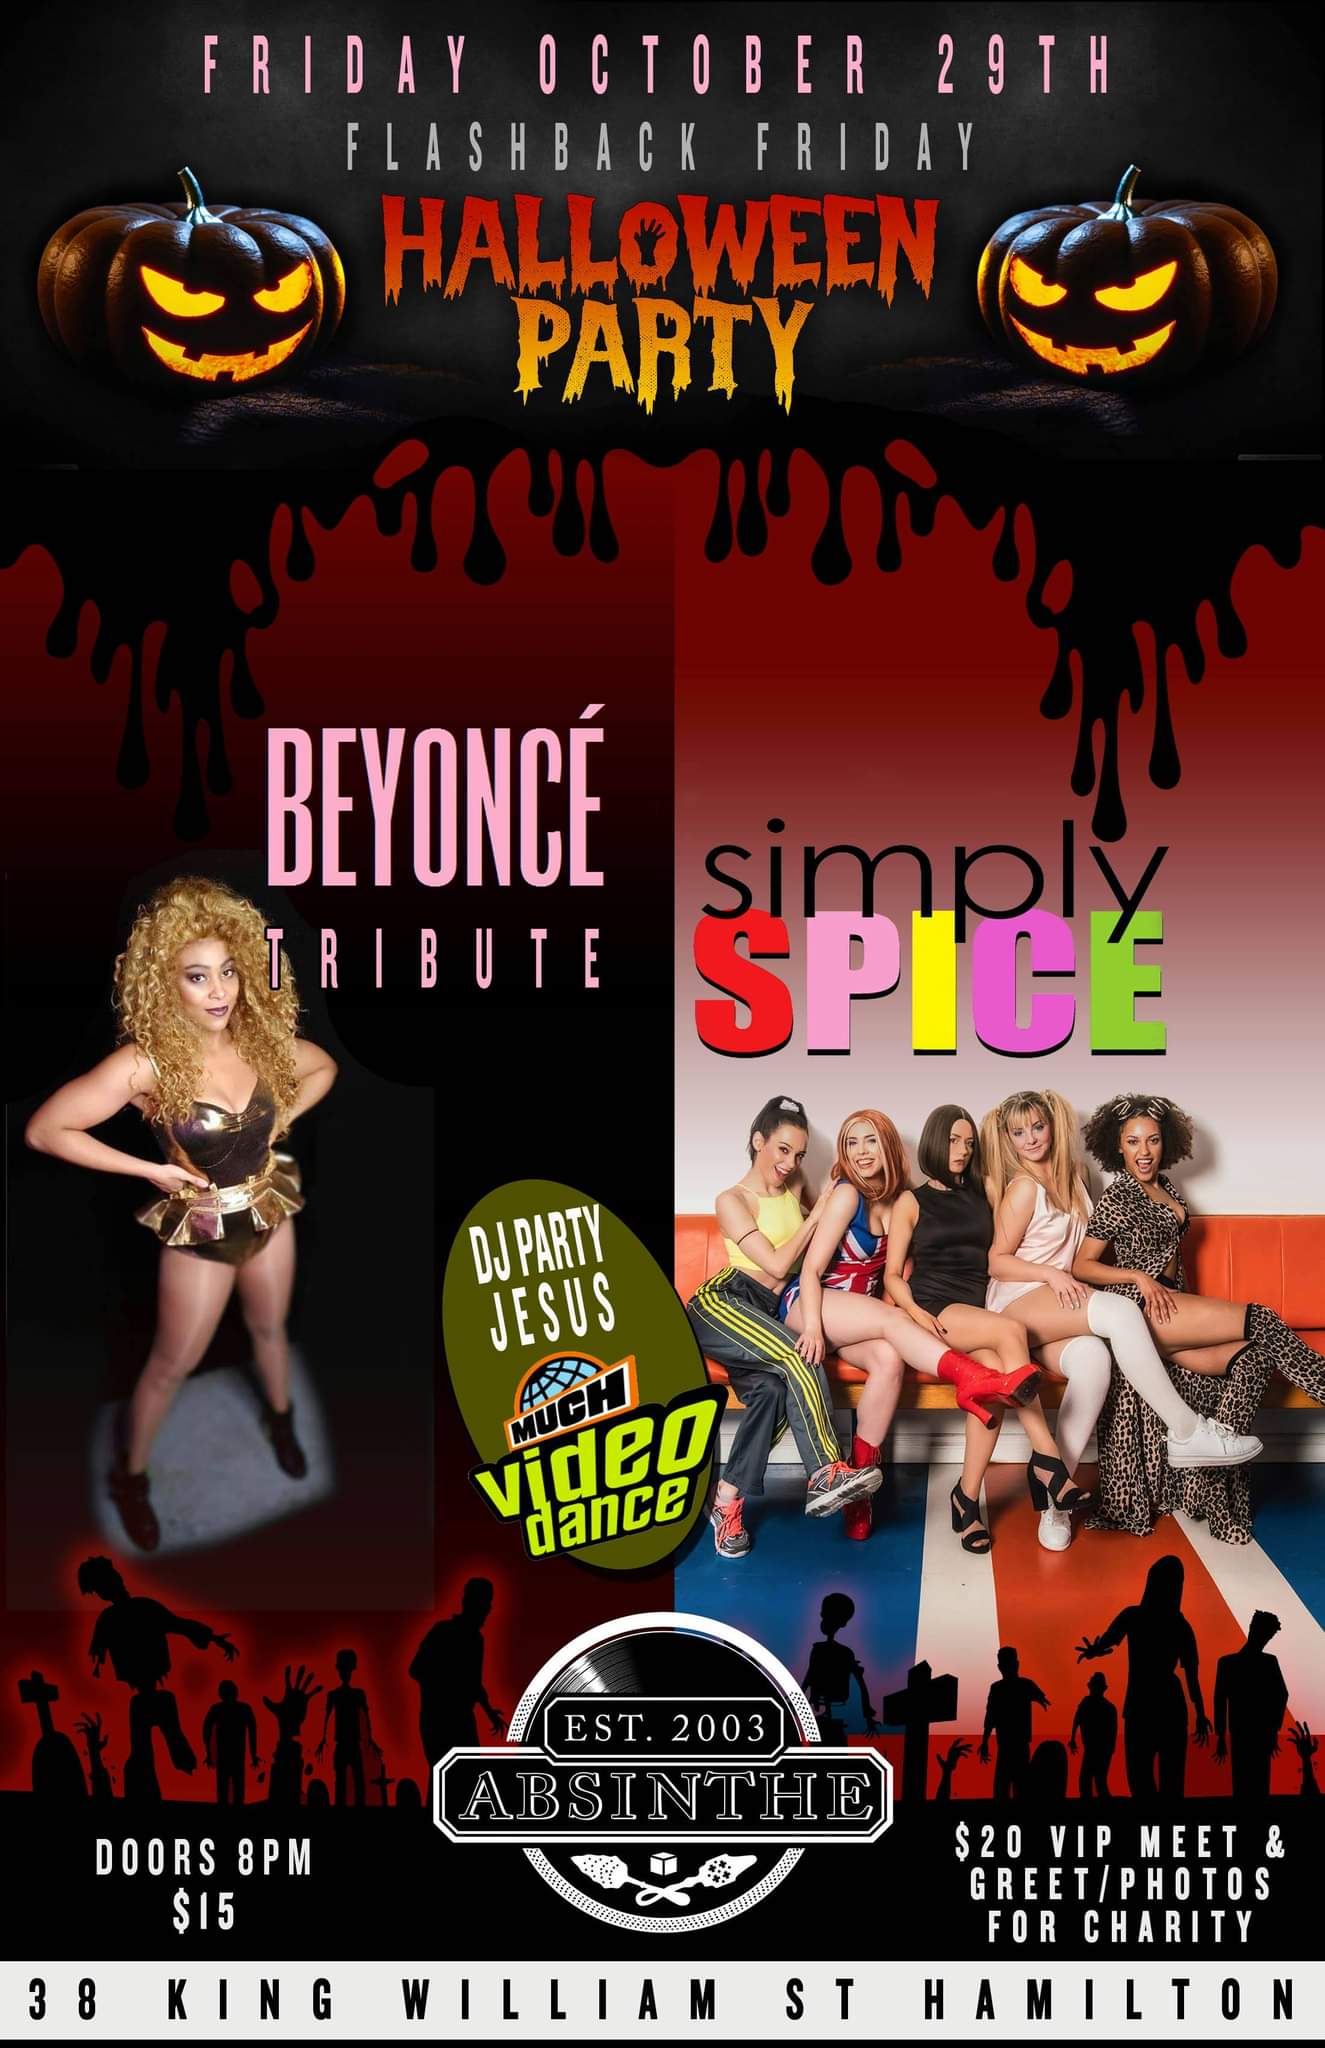 Flashback Friday Halloween with Simply Spice(Spice Girls), Beyonce Tribute, DJ Party Jesus